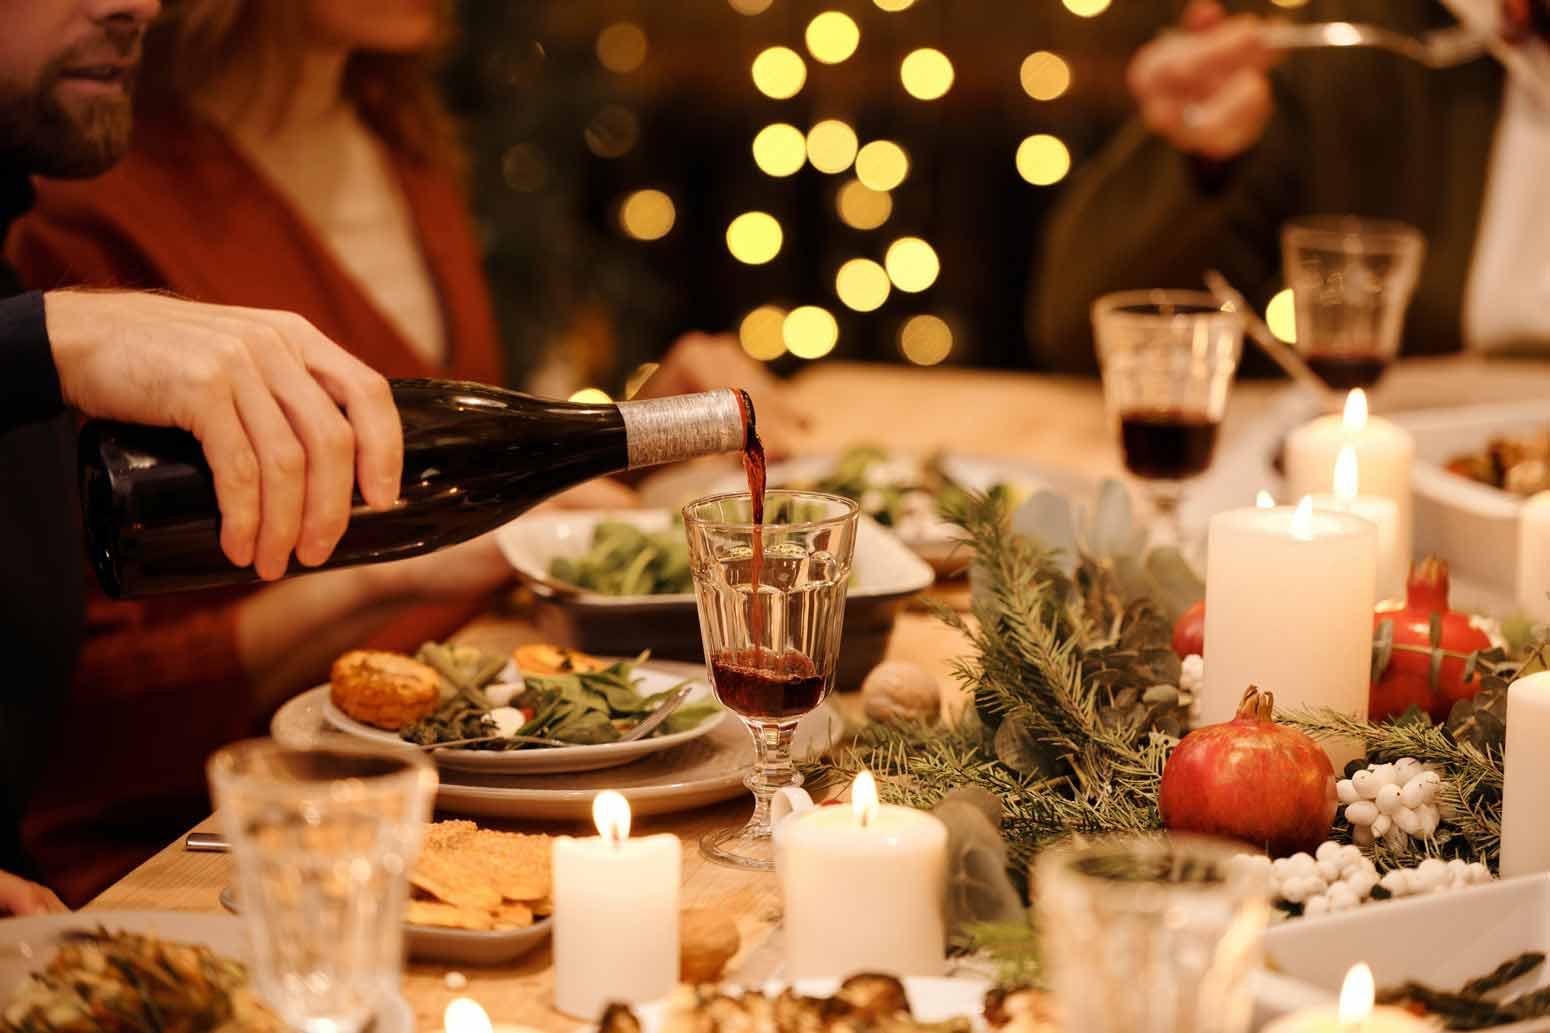 man pouring wine into a glass on a holiday dinner table, a potential dilemma for those needing a sober holiday survival guide